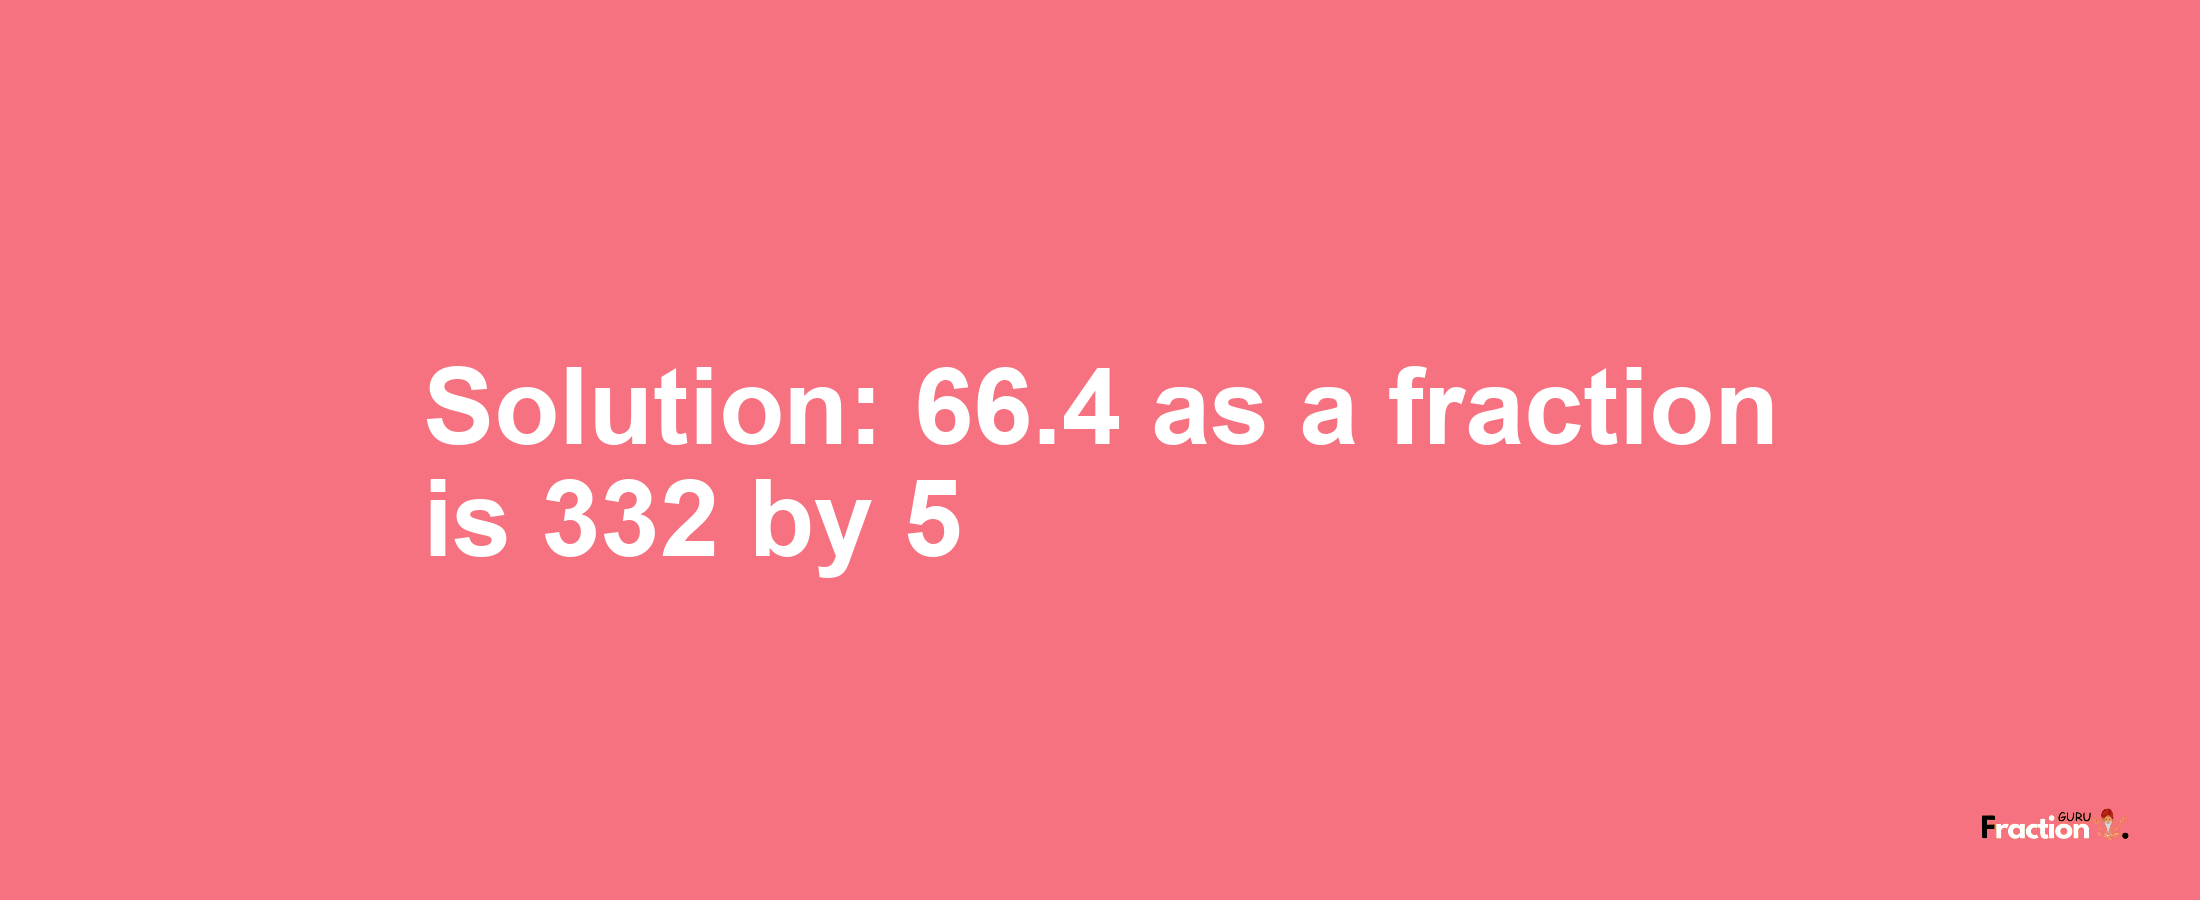 Solution:66.4 as a fraction is 332/5